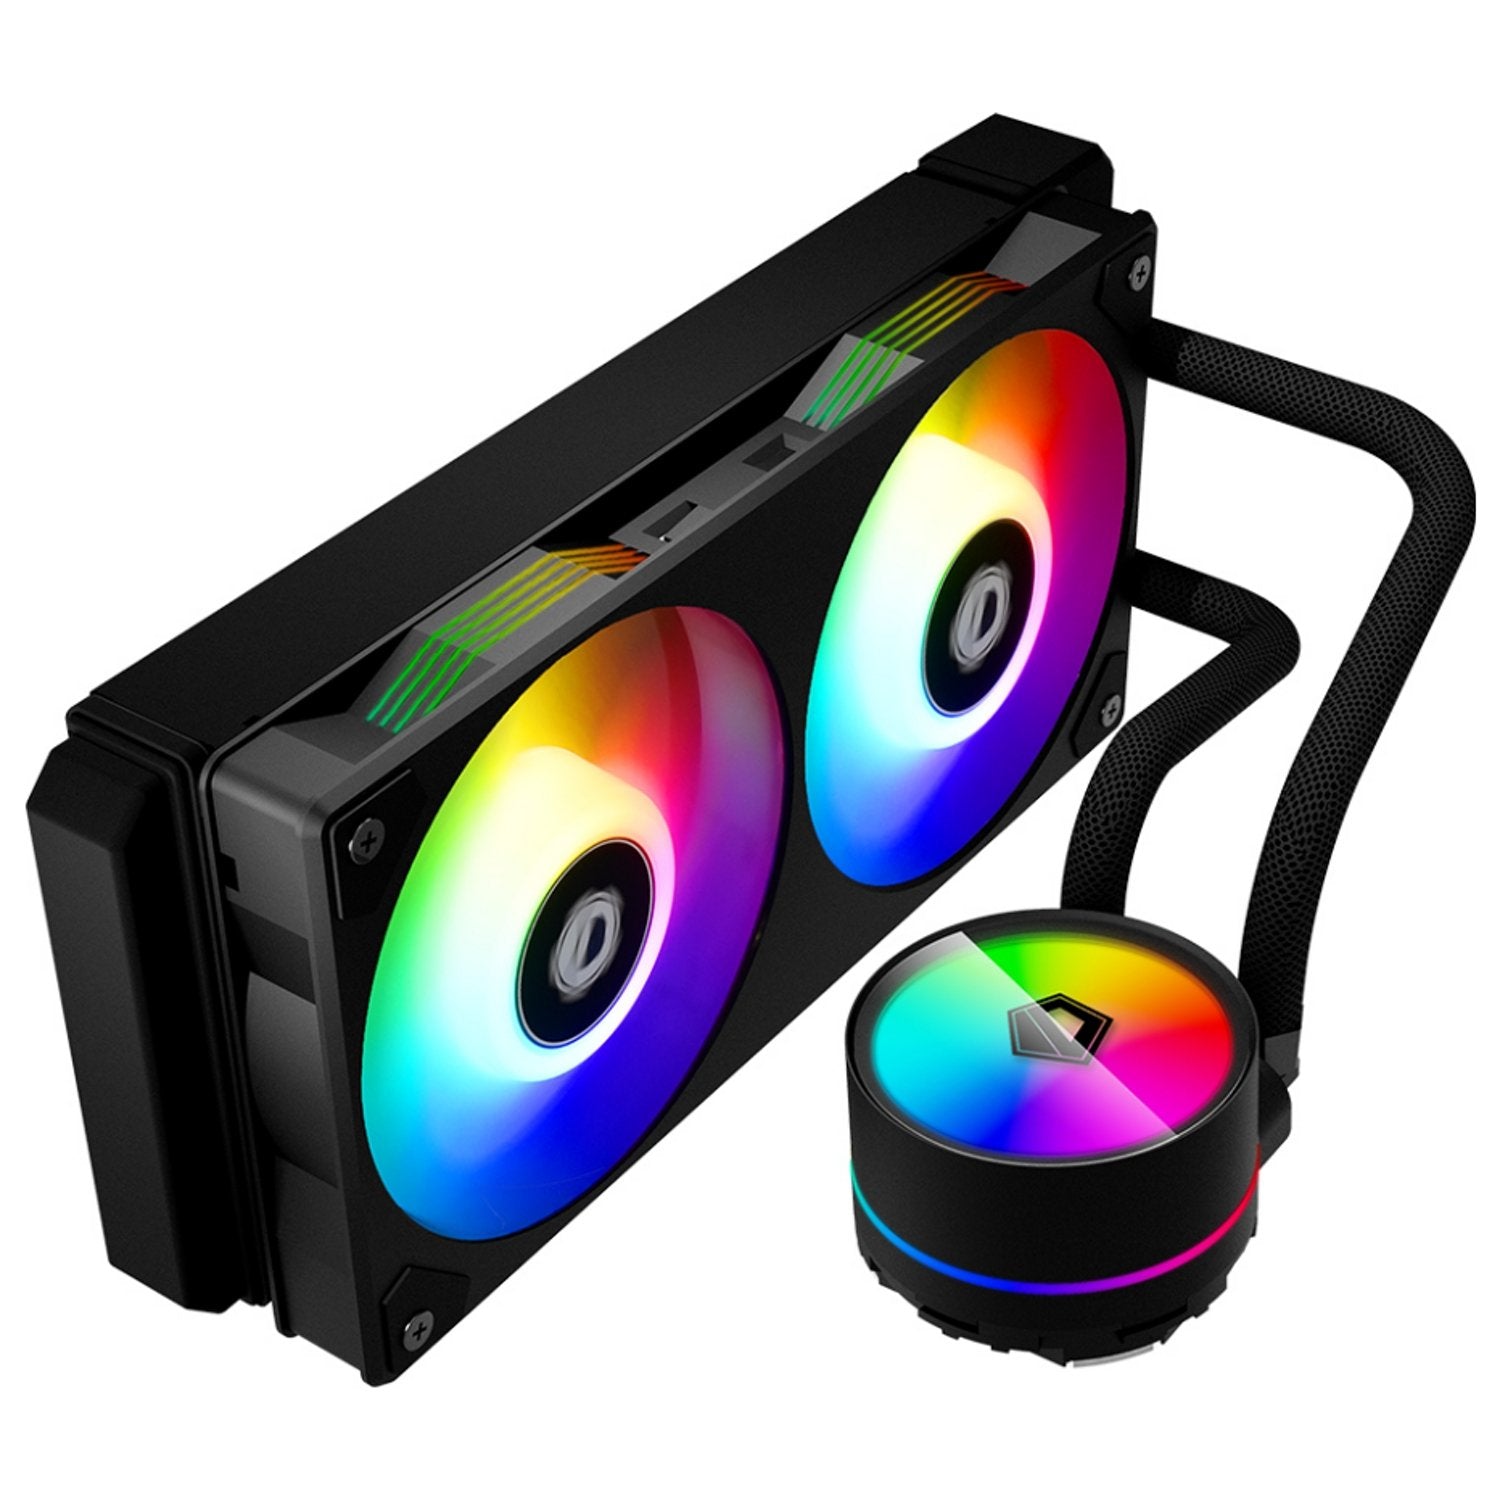 ID-COOLING IceFlow 240 Addressable RGB AIO CPU Liquid Cooler - I Gaming Computer | Australia Wide Shipping | Buy now, Pay Later with Afterpay, Klarna, Zip, Latitude & Paypal